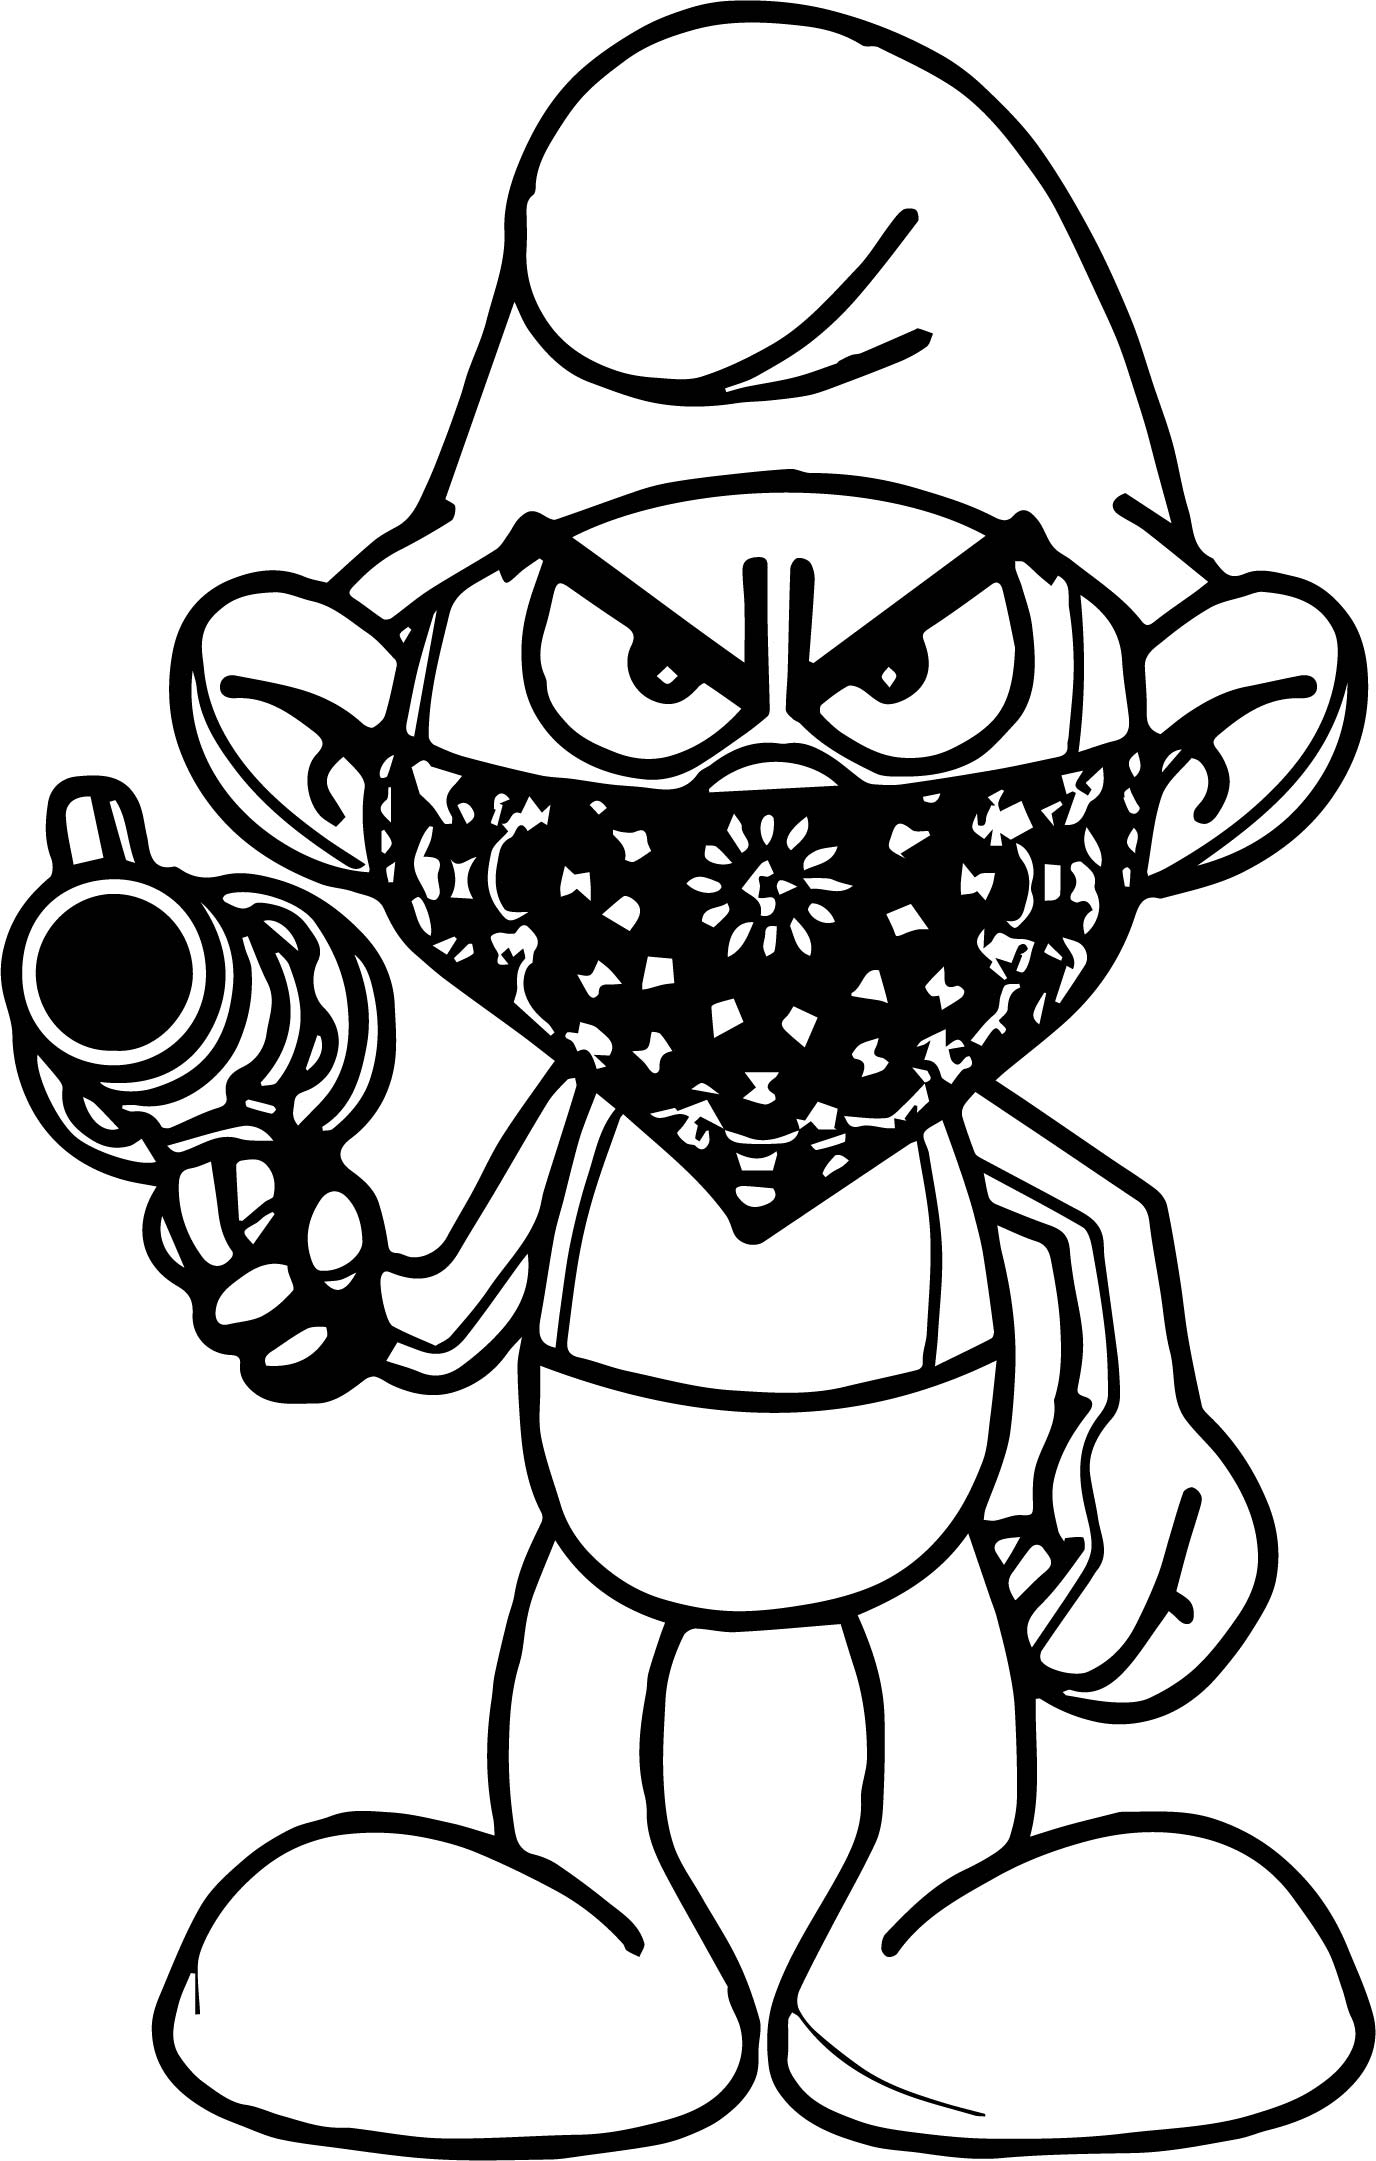 Gangster Mickey Mouse Coloring Pages at GetColorings.com | Free